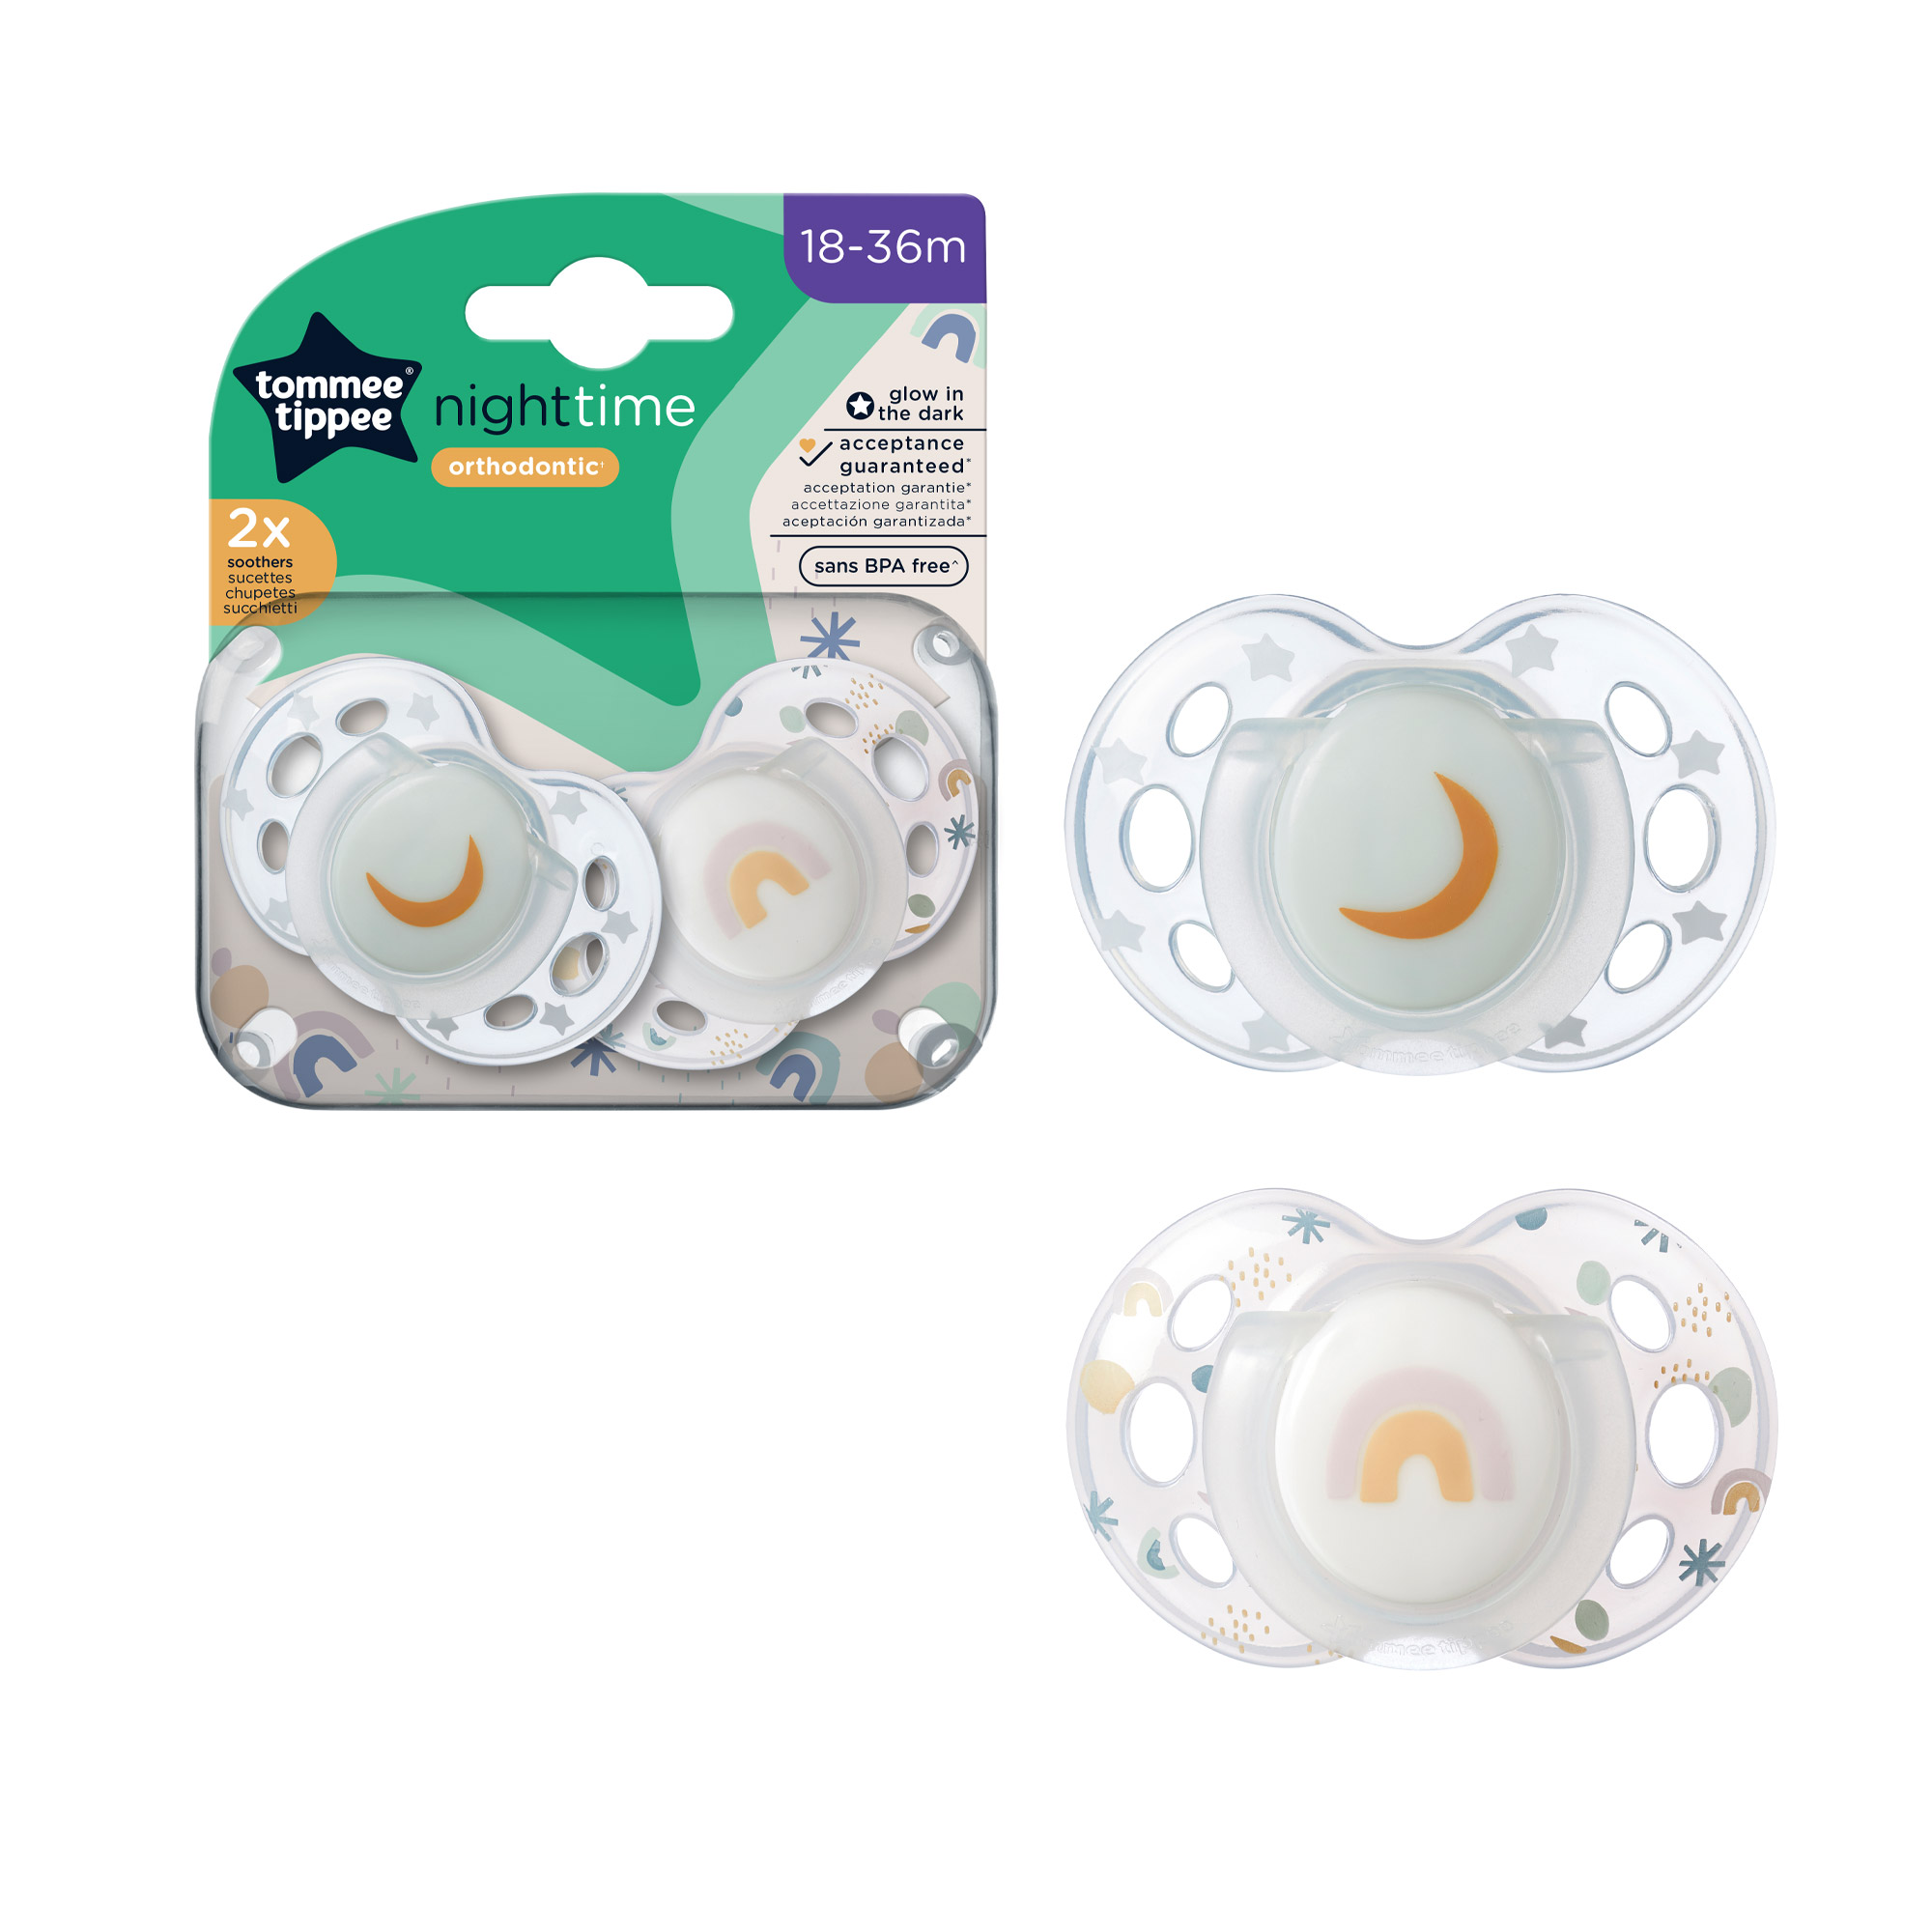 2 sucettes Closer to Nature nuit mixte MULTICOLORE Tommee Tippee